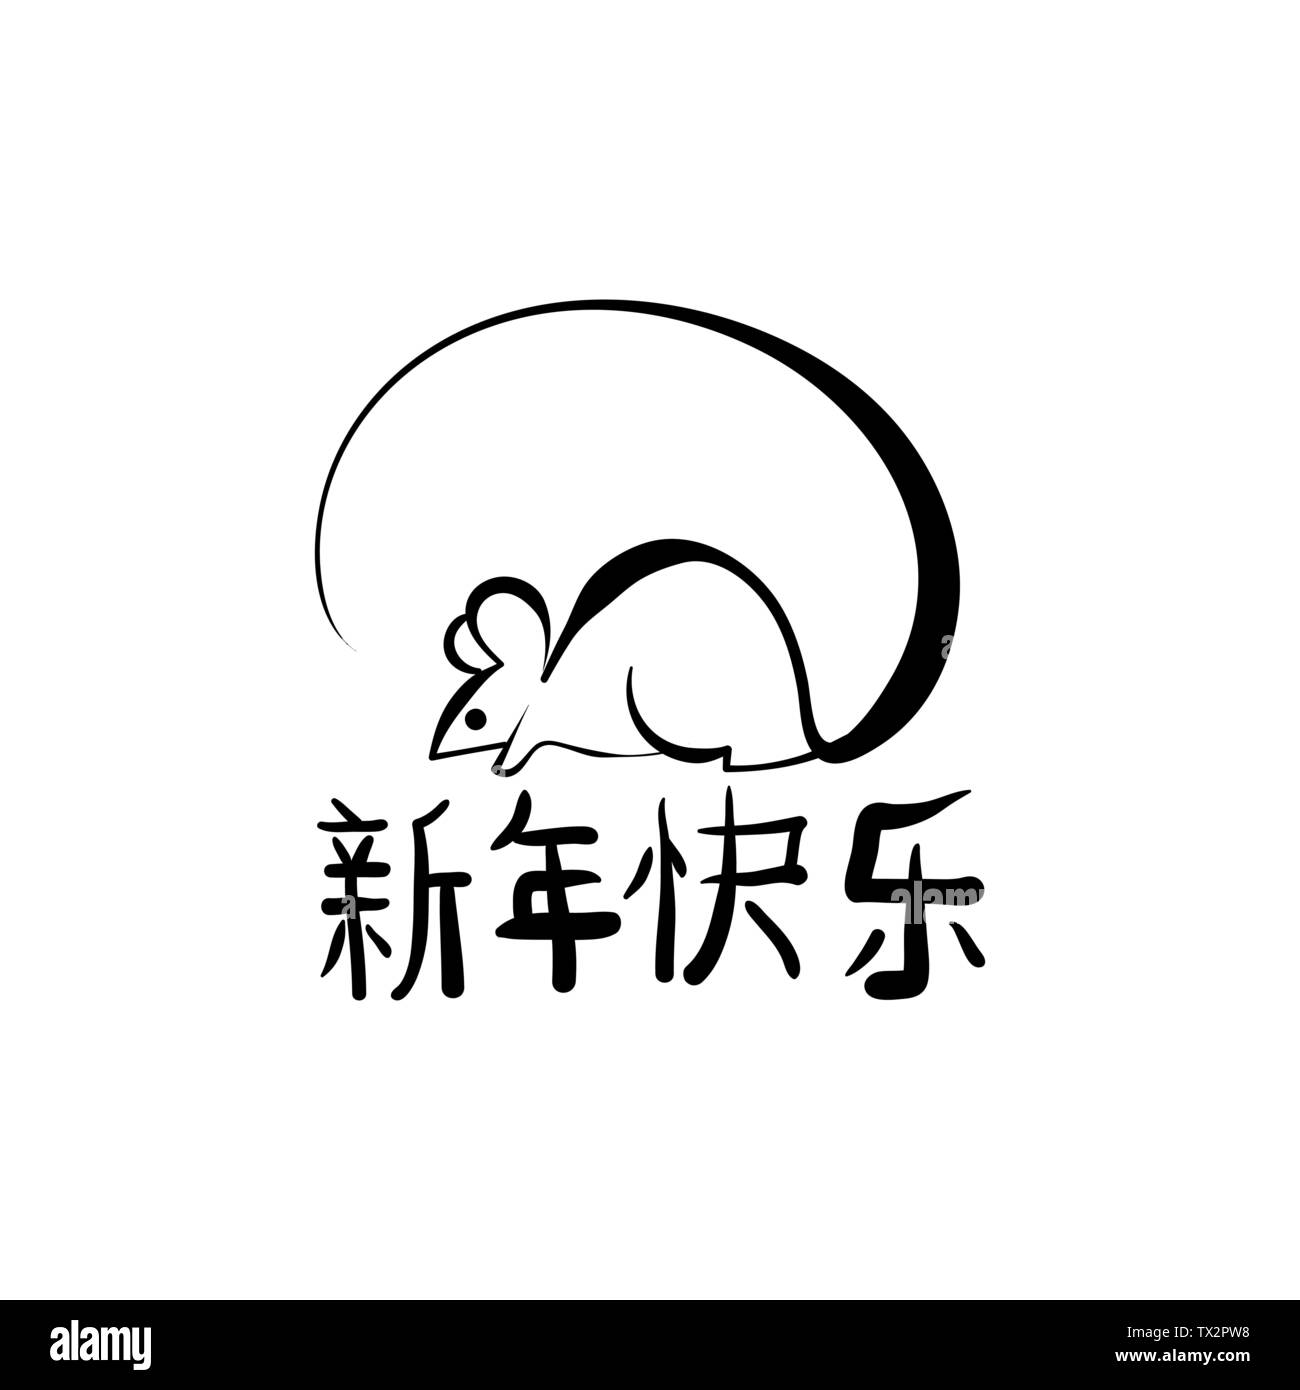 Happy New Year. 2020 new year rat chinese traditional new year. Ink paintbrush silhouette black white. Simple monochrome stroke artwork. Stock Vector